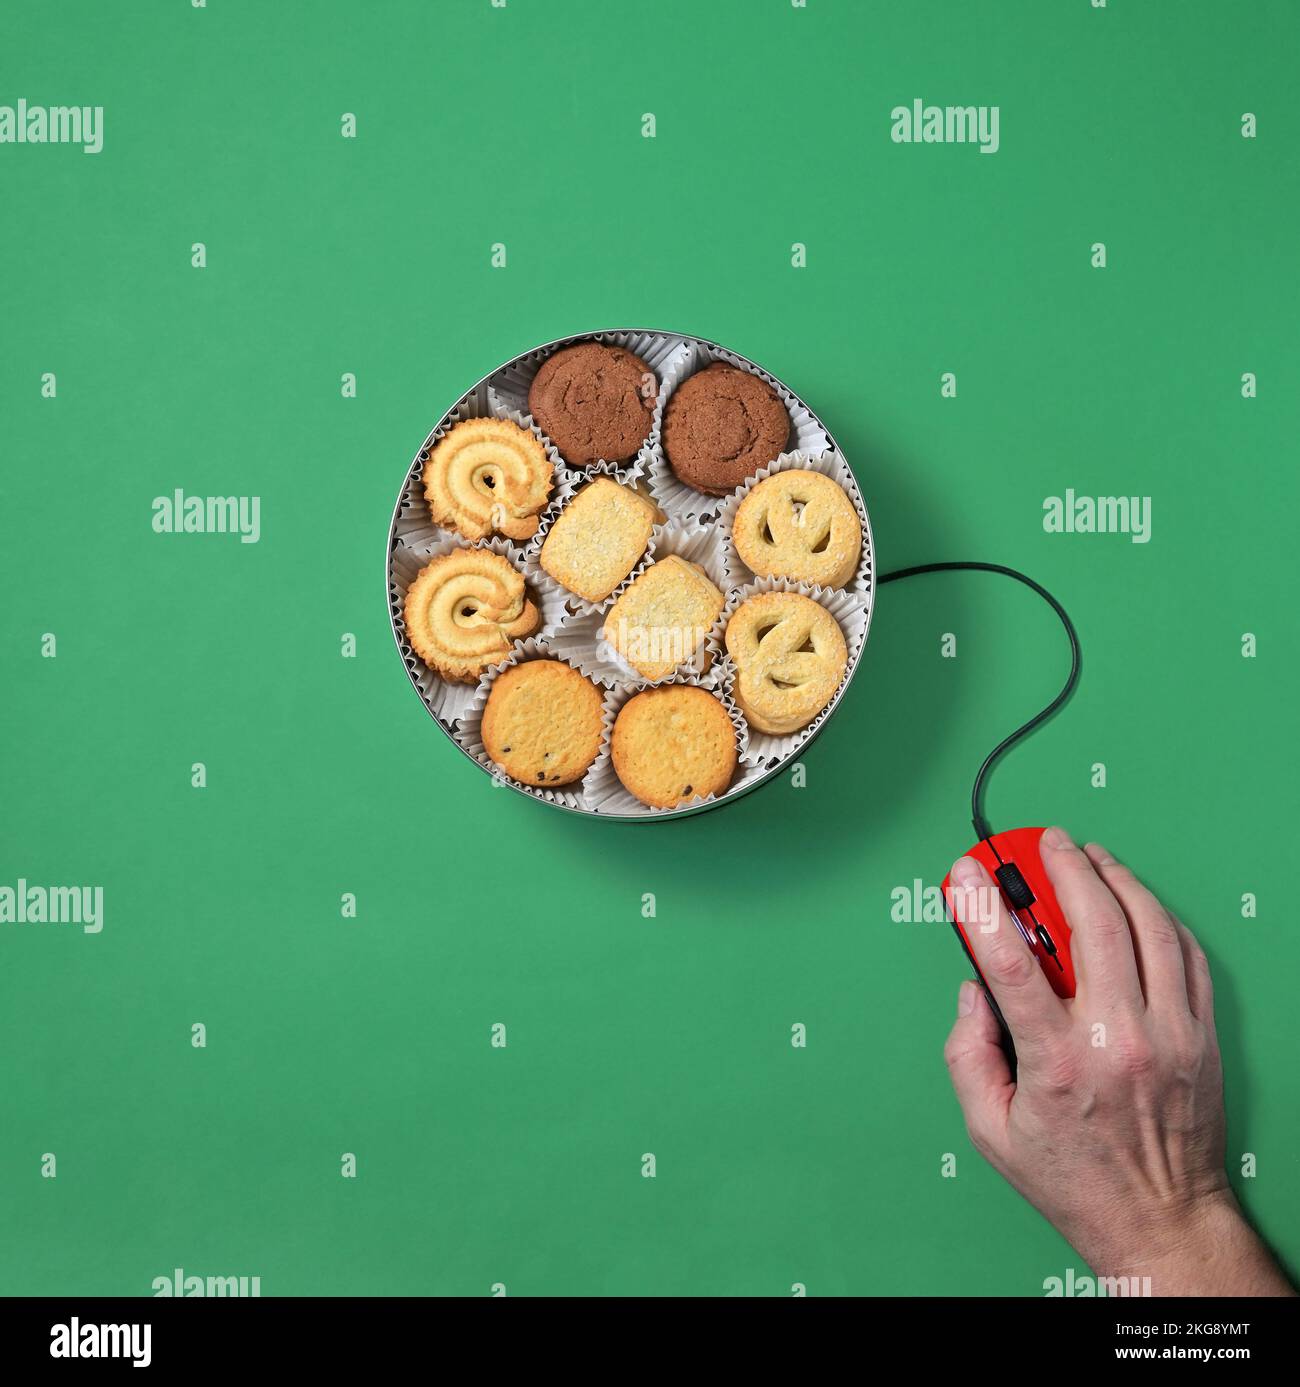 Abstract Accept Cookie Pop-Up Message from Box With Cookies For Christmas Stock Photo